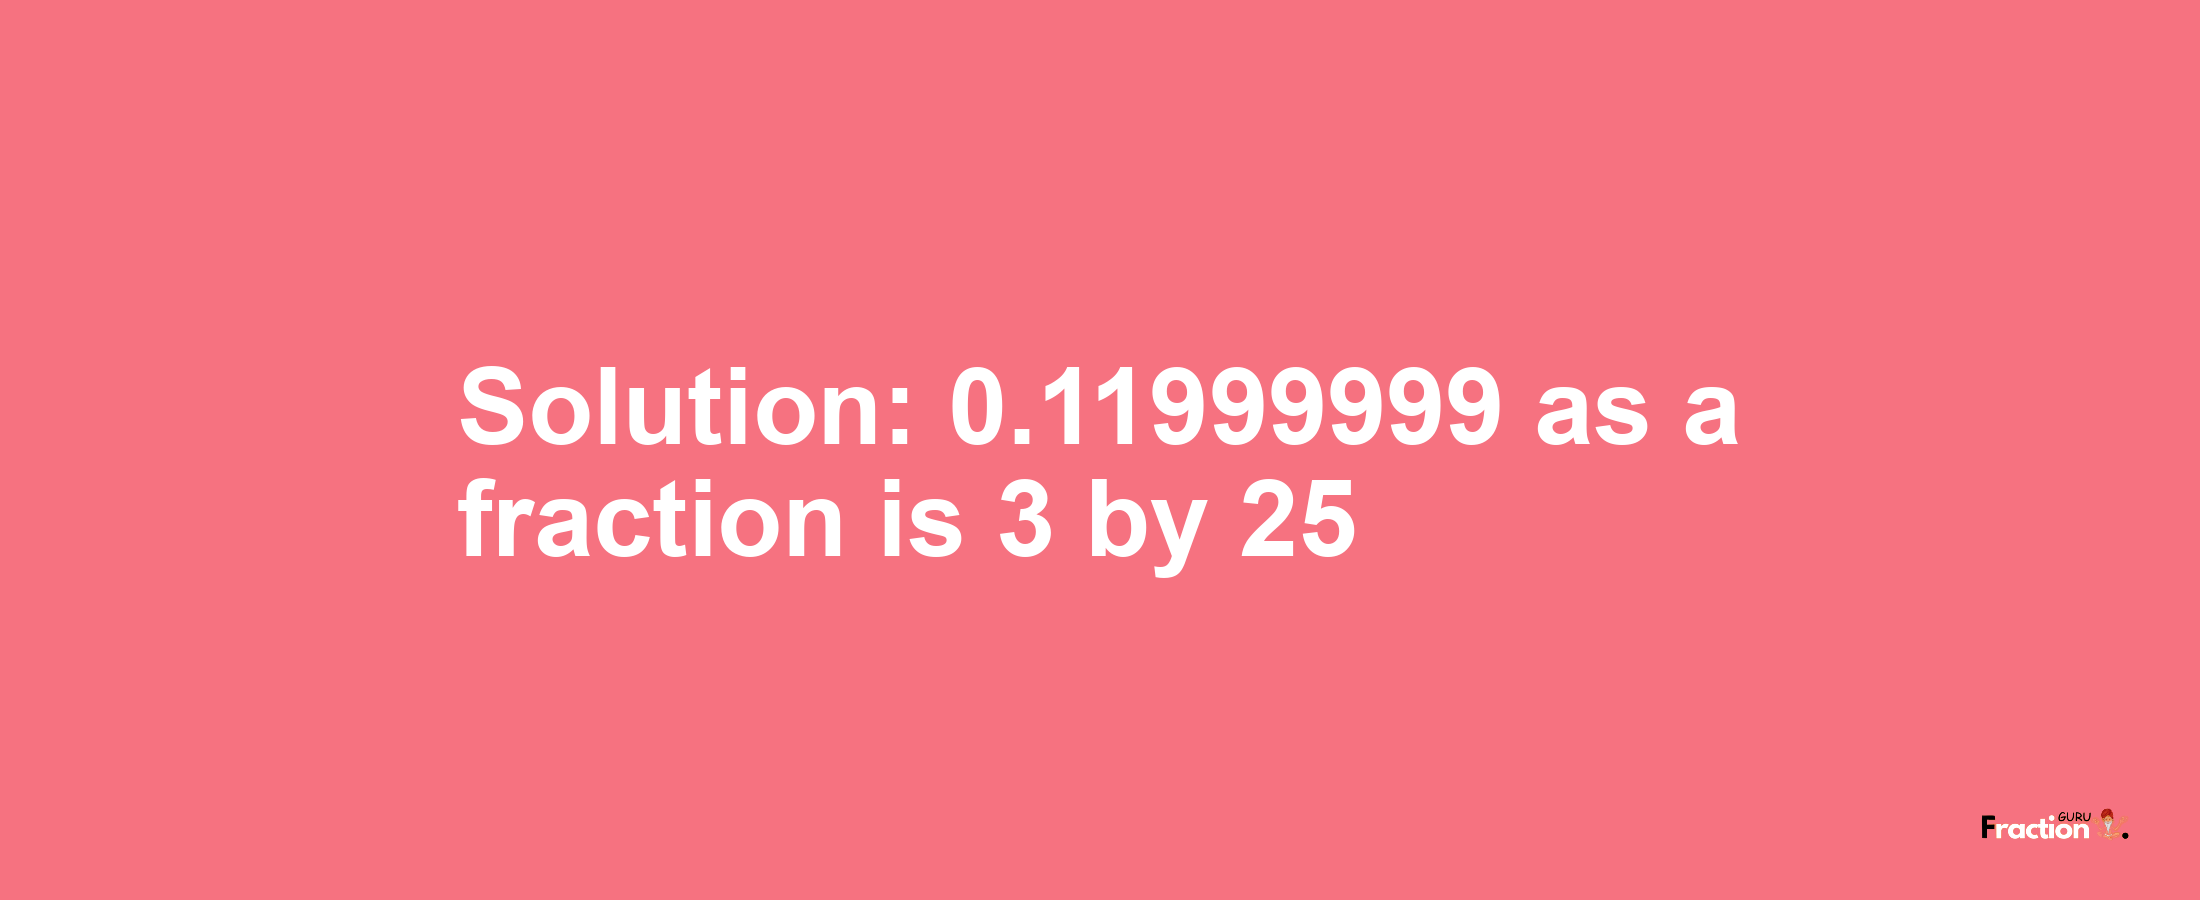 Solution:0.11999999 as a fraction is 3/25